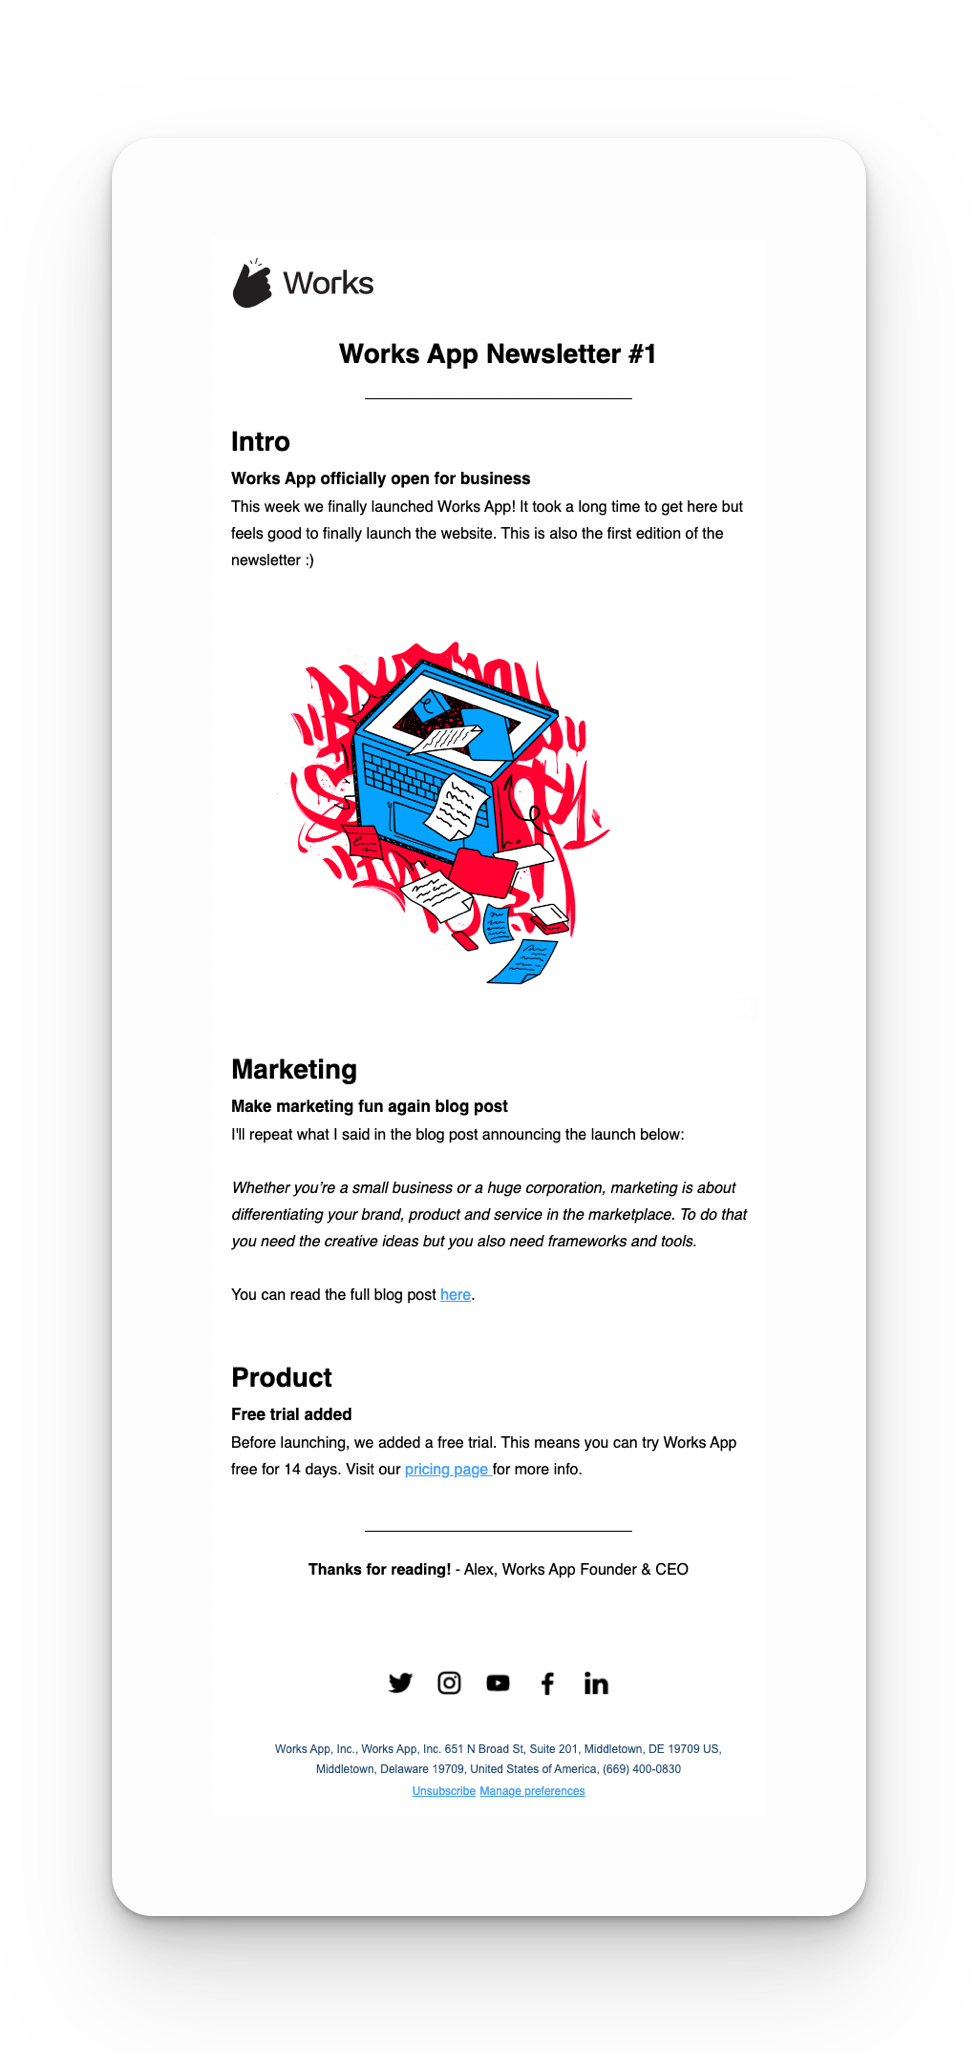 A screenshot of Works' newsletter landing page